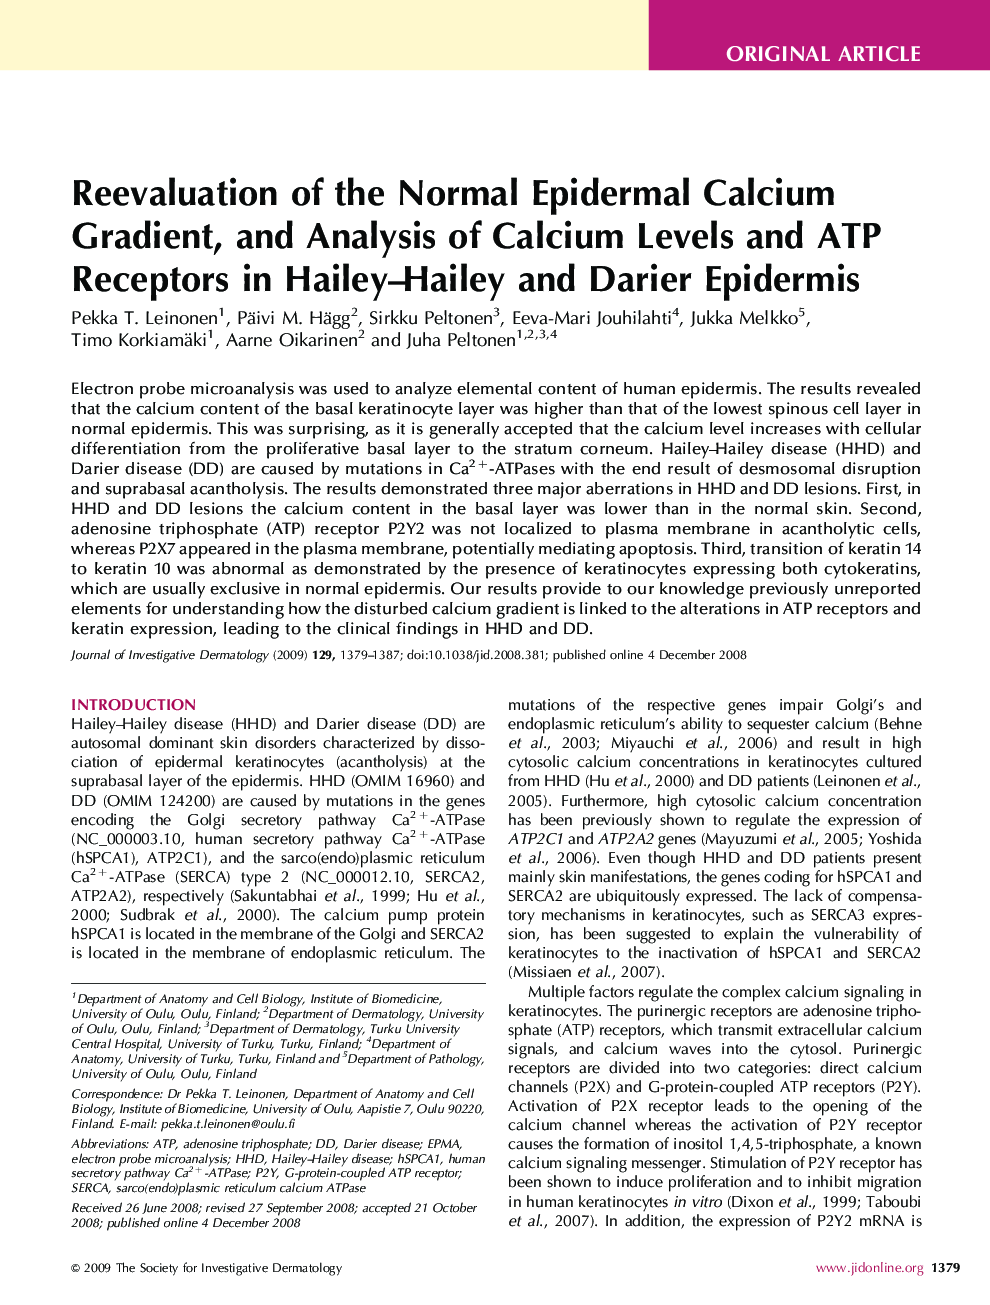 Reevaluation of the Normal Epidermal Calcium Gradient, and Analysis of Calcium Levels and ATP Receptors in Hailey–Hailey and Darier Epidermis